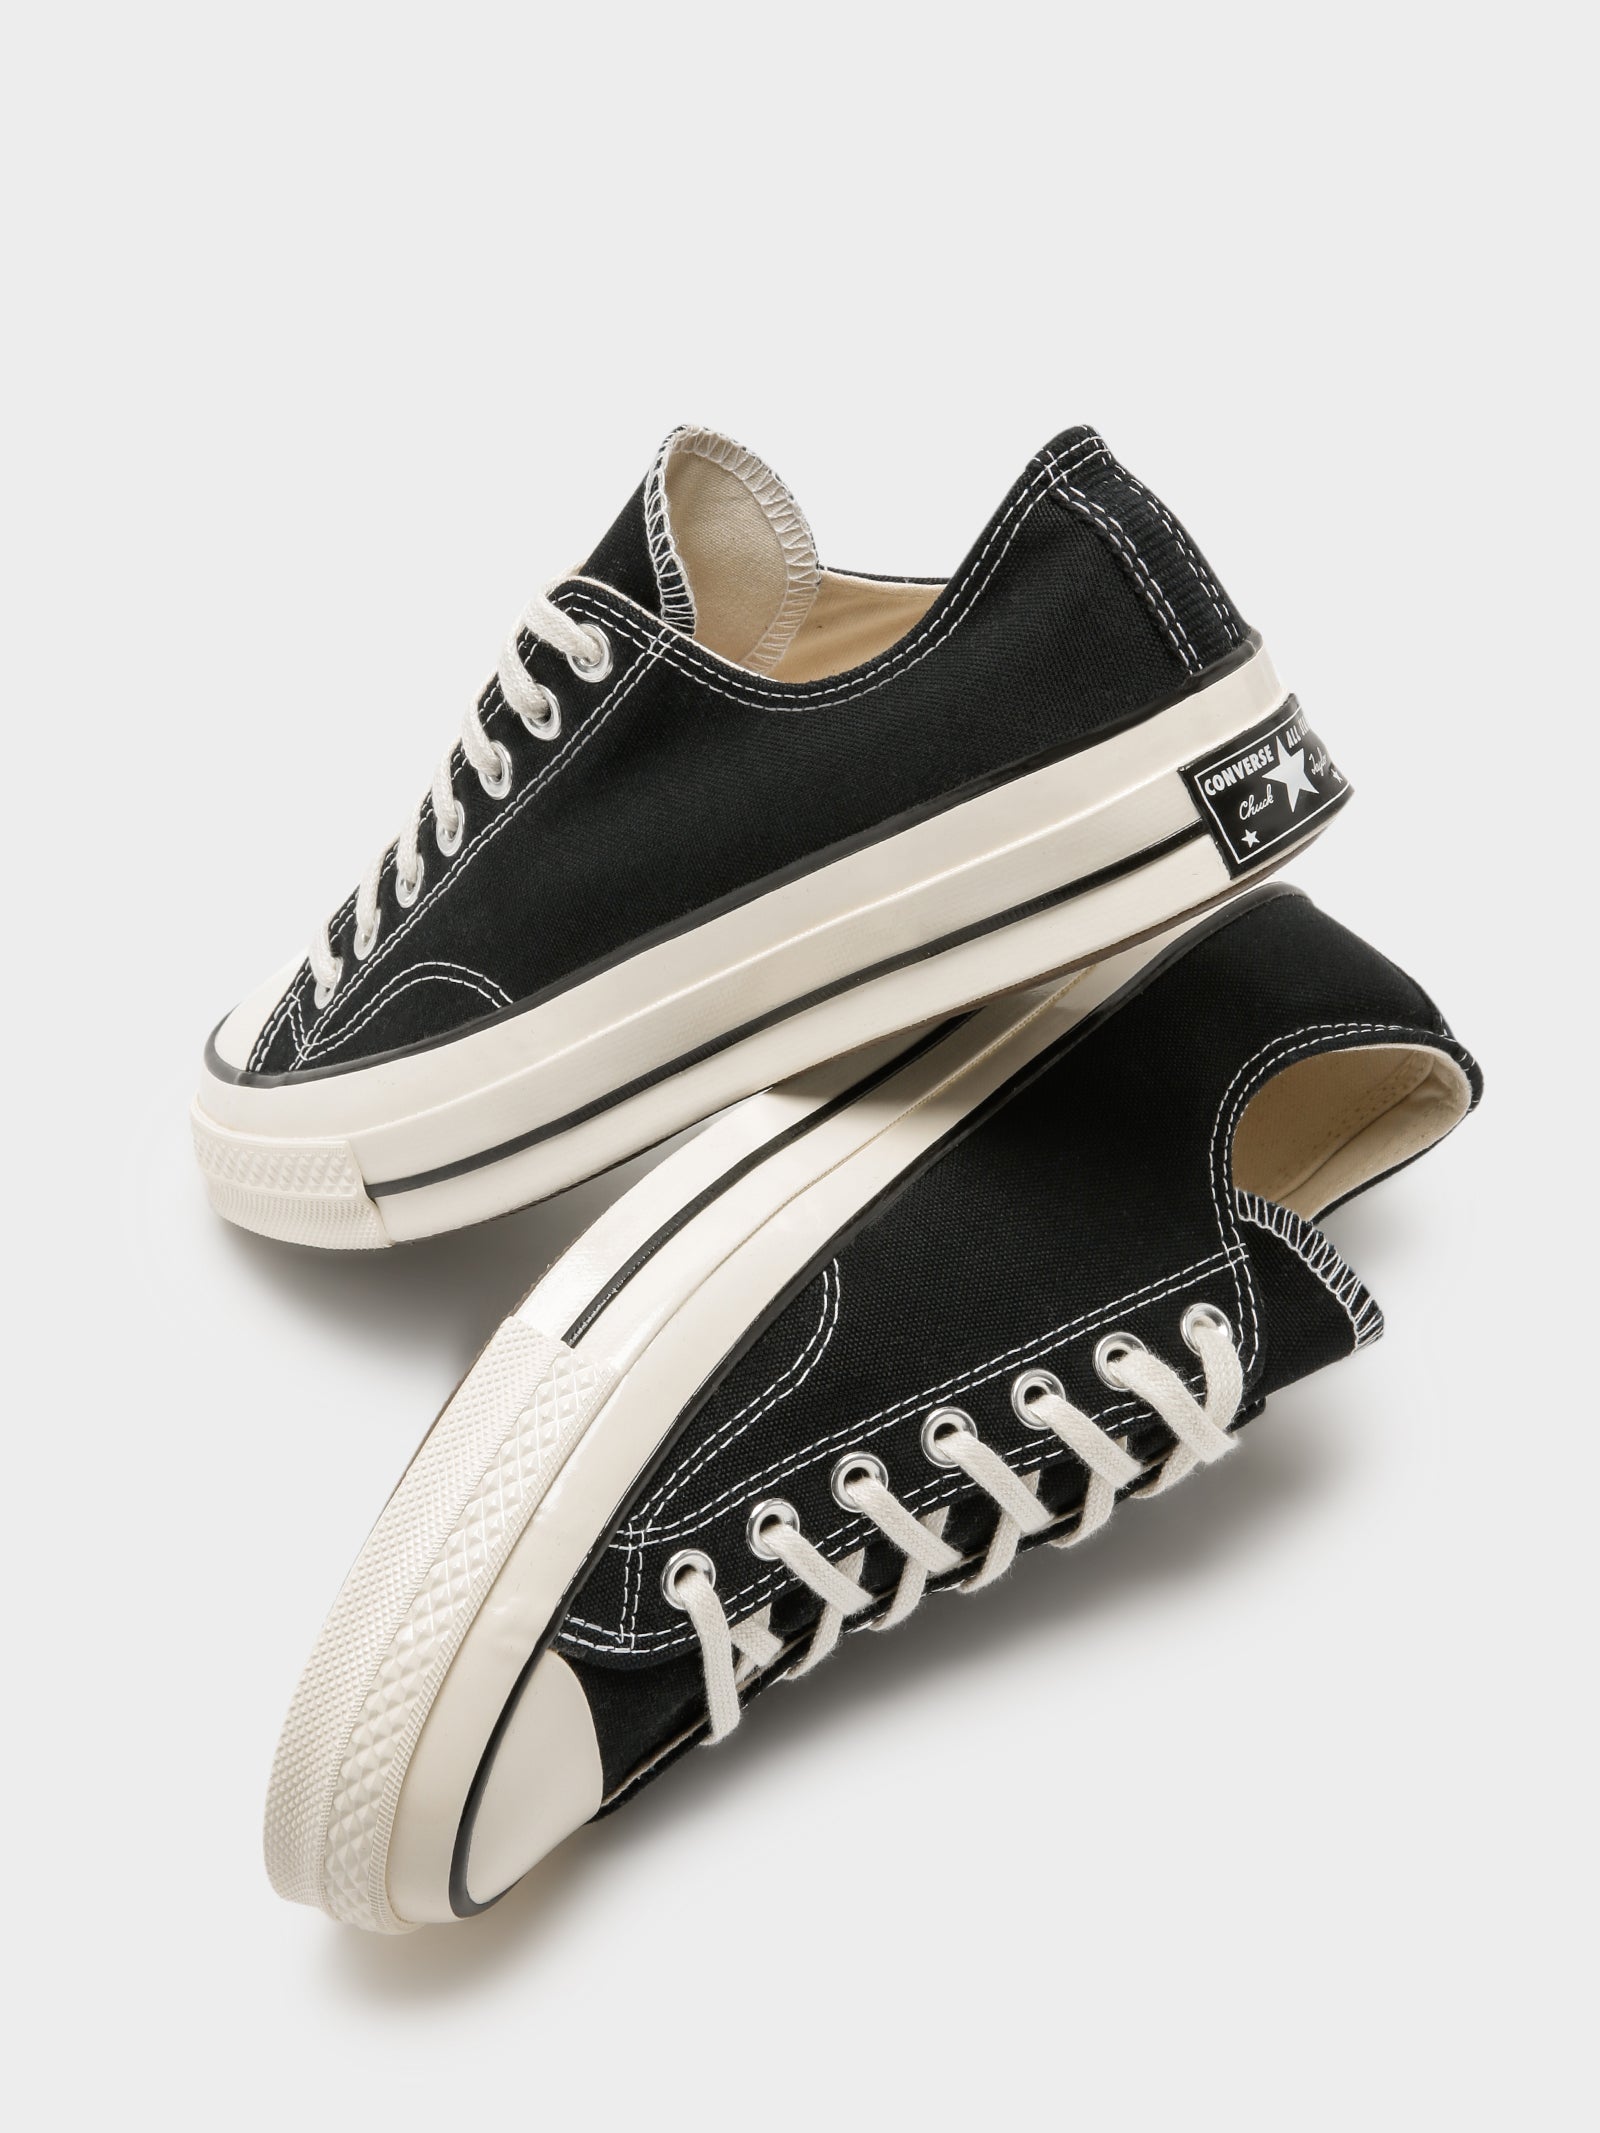 Unisex Chuck Taylor All Star 70 Low Sneakers Black - Glue Store